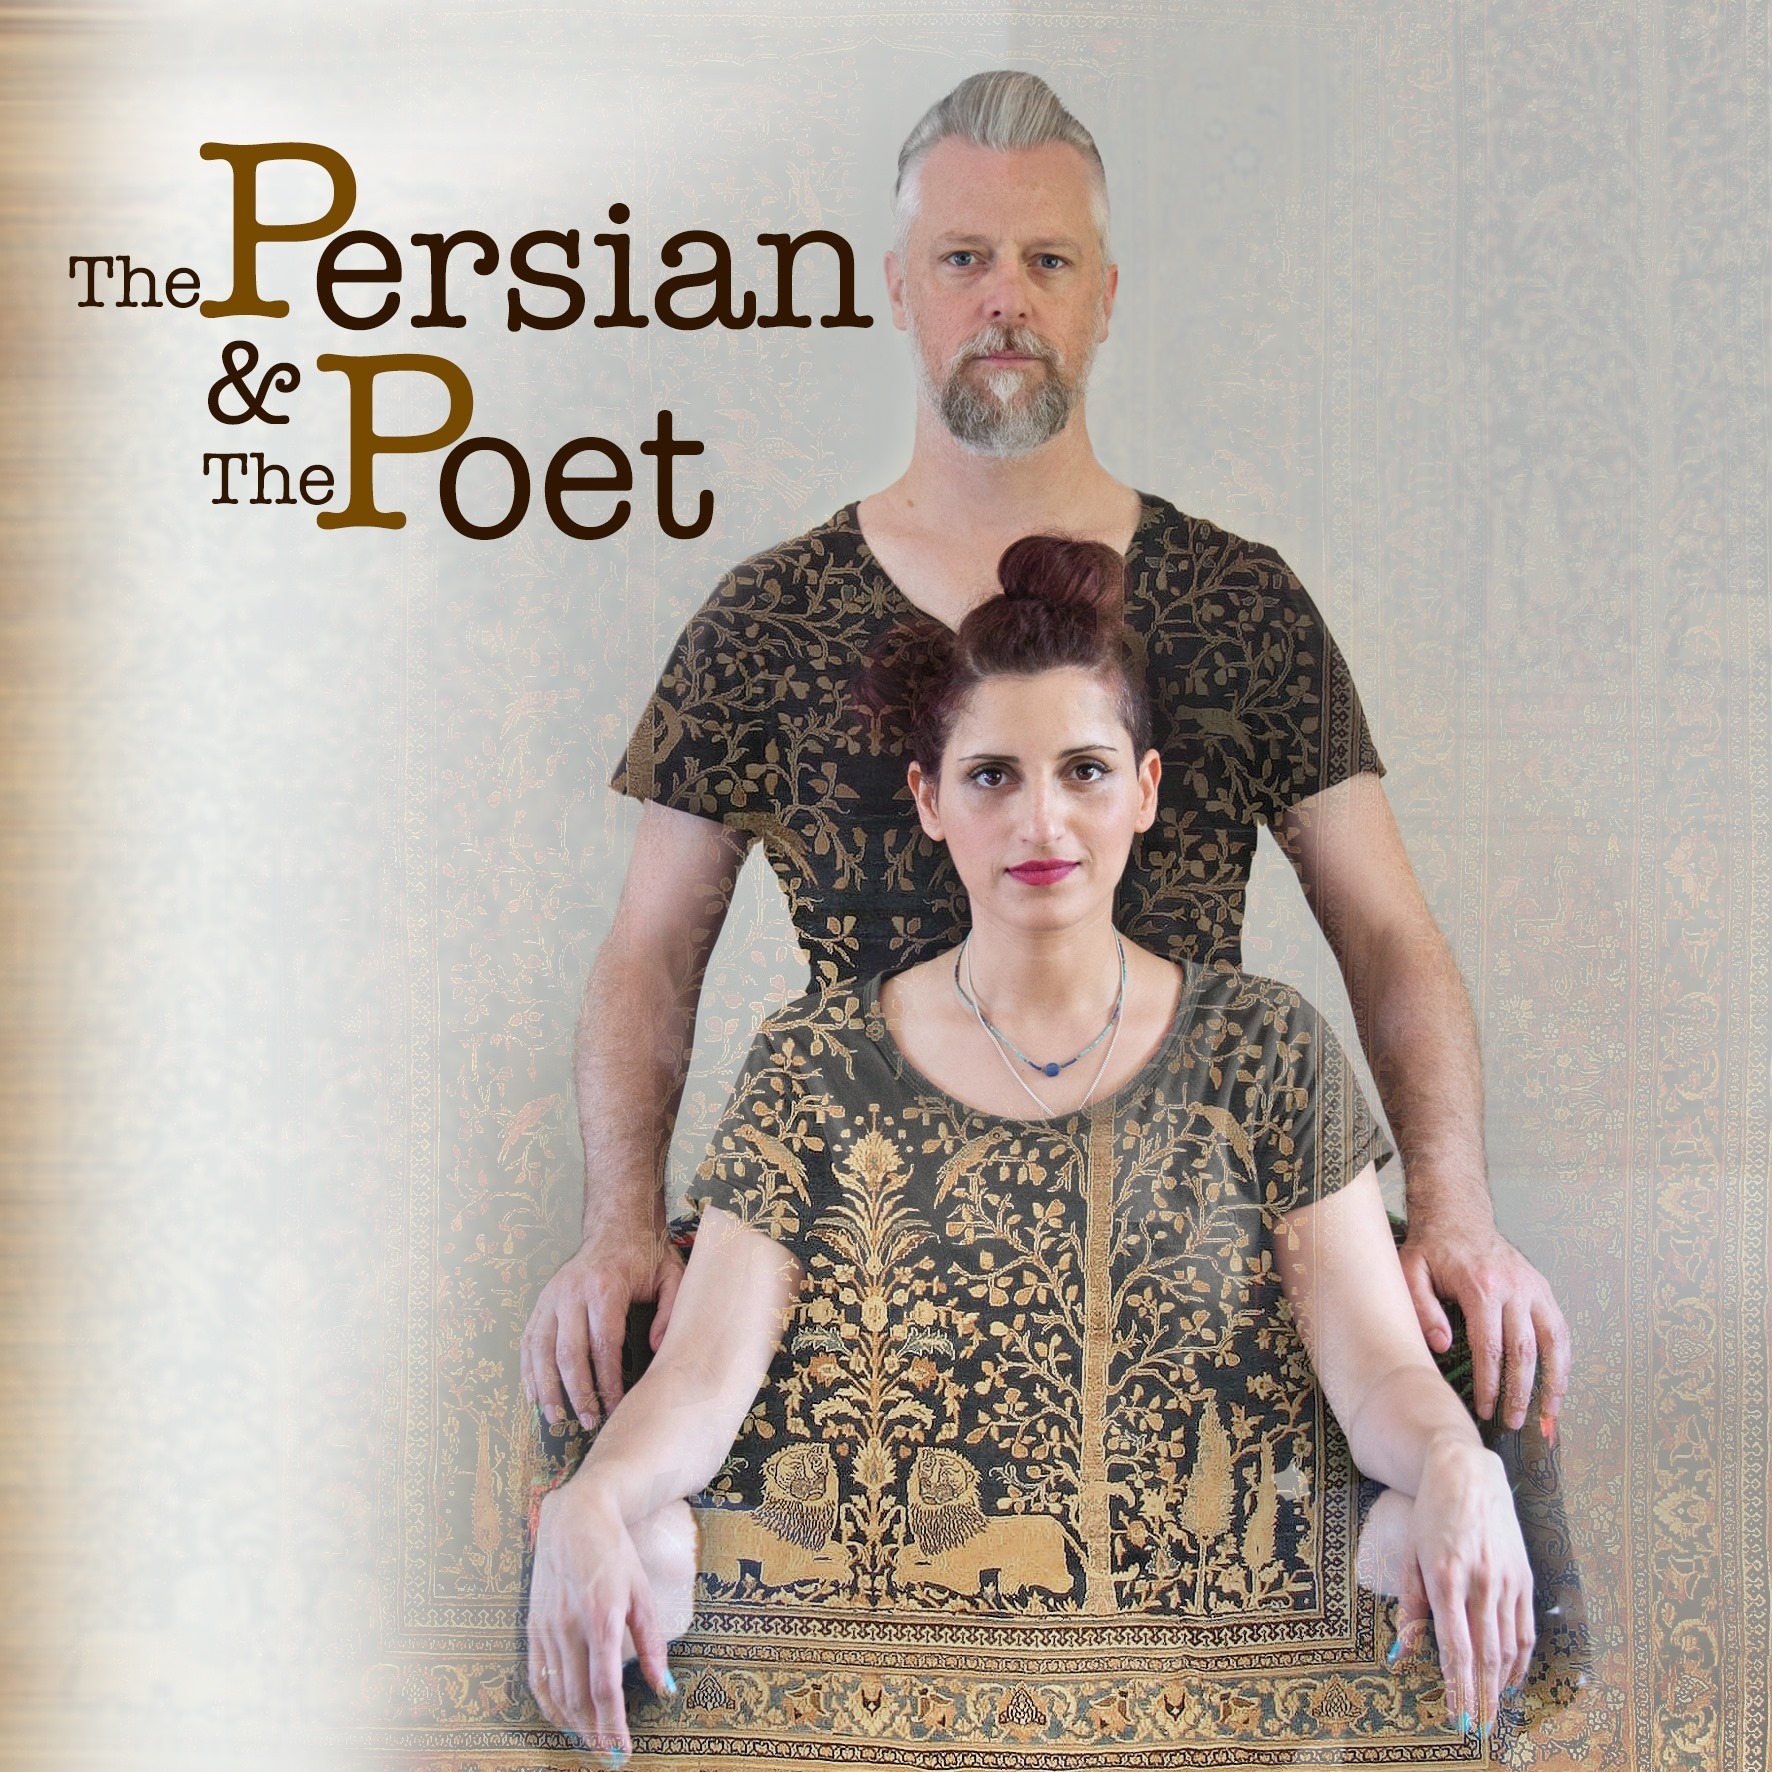 The Persian and The Poet